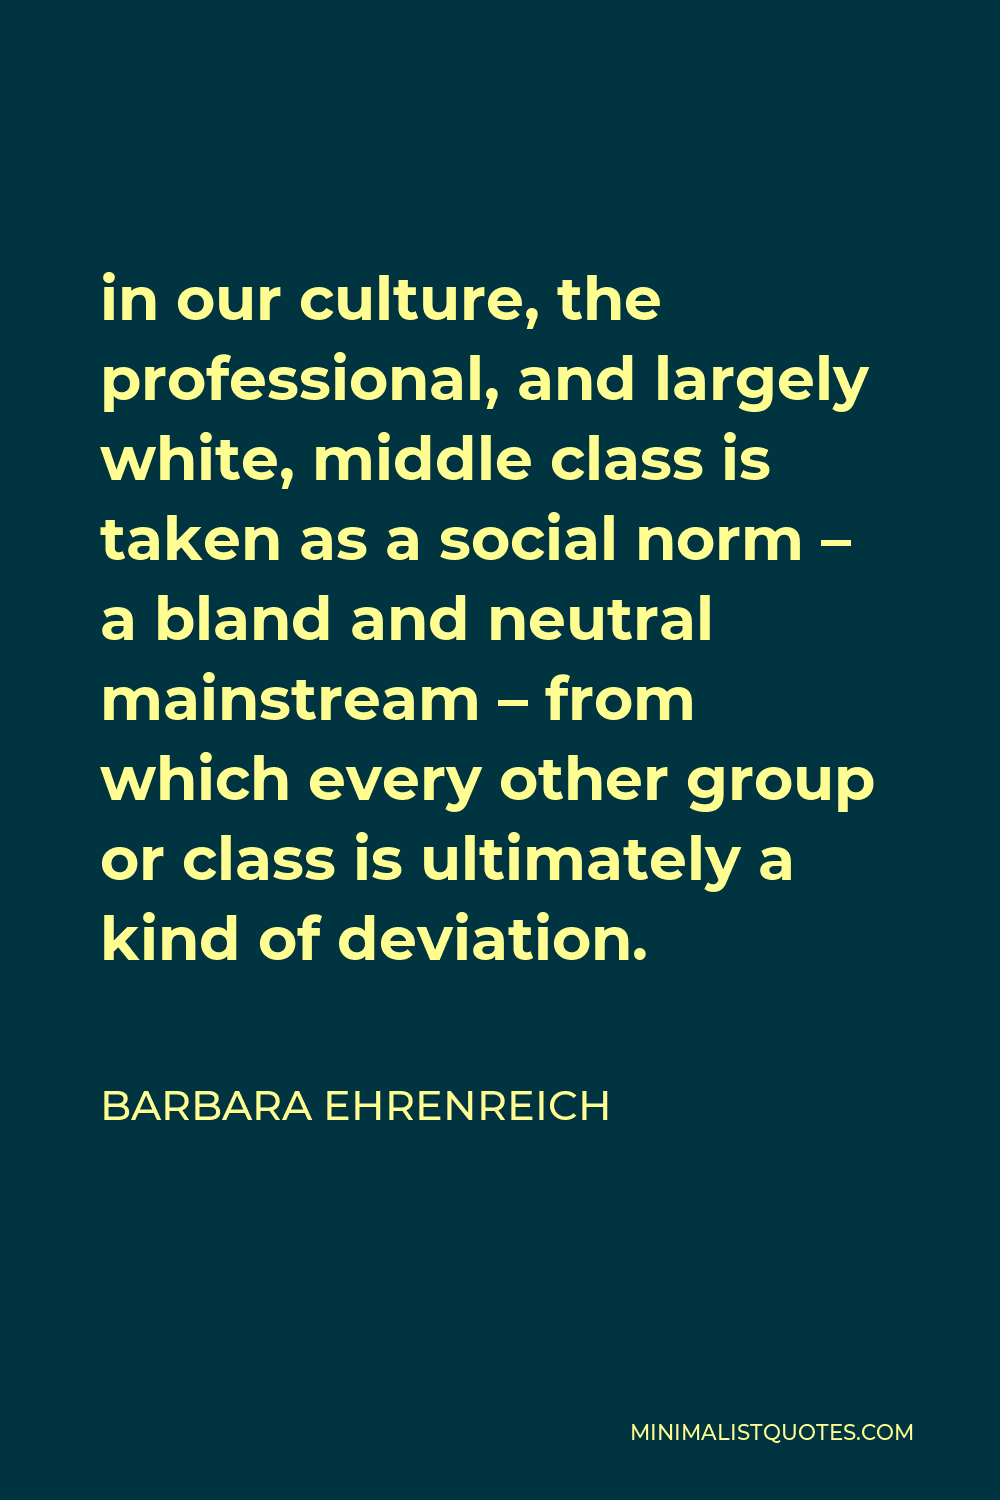 Barbara Ehrenreich Quote - in our culture, the professional, and largely white, middle class is taken as a social norm – a bland and neutral mainstream – from which every other group or class is ultimately a kind of deviation.